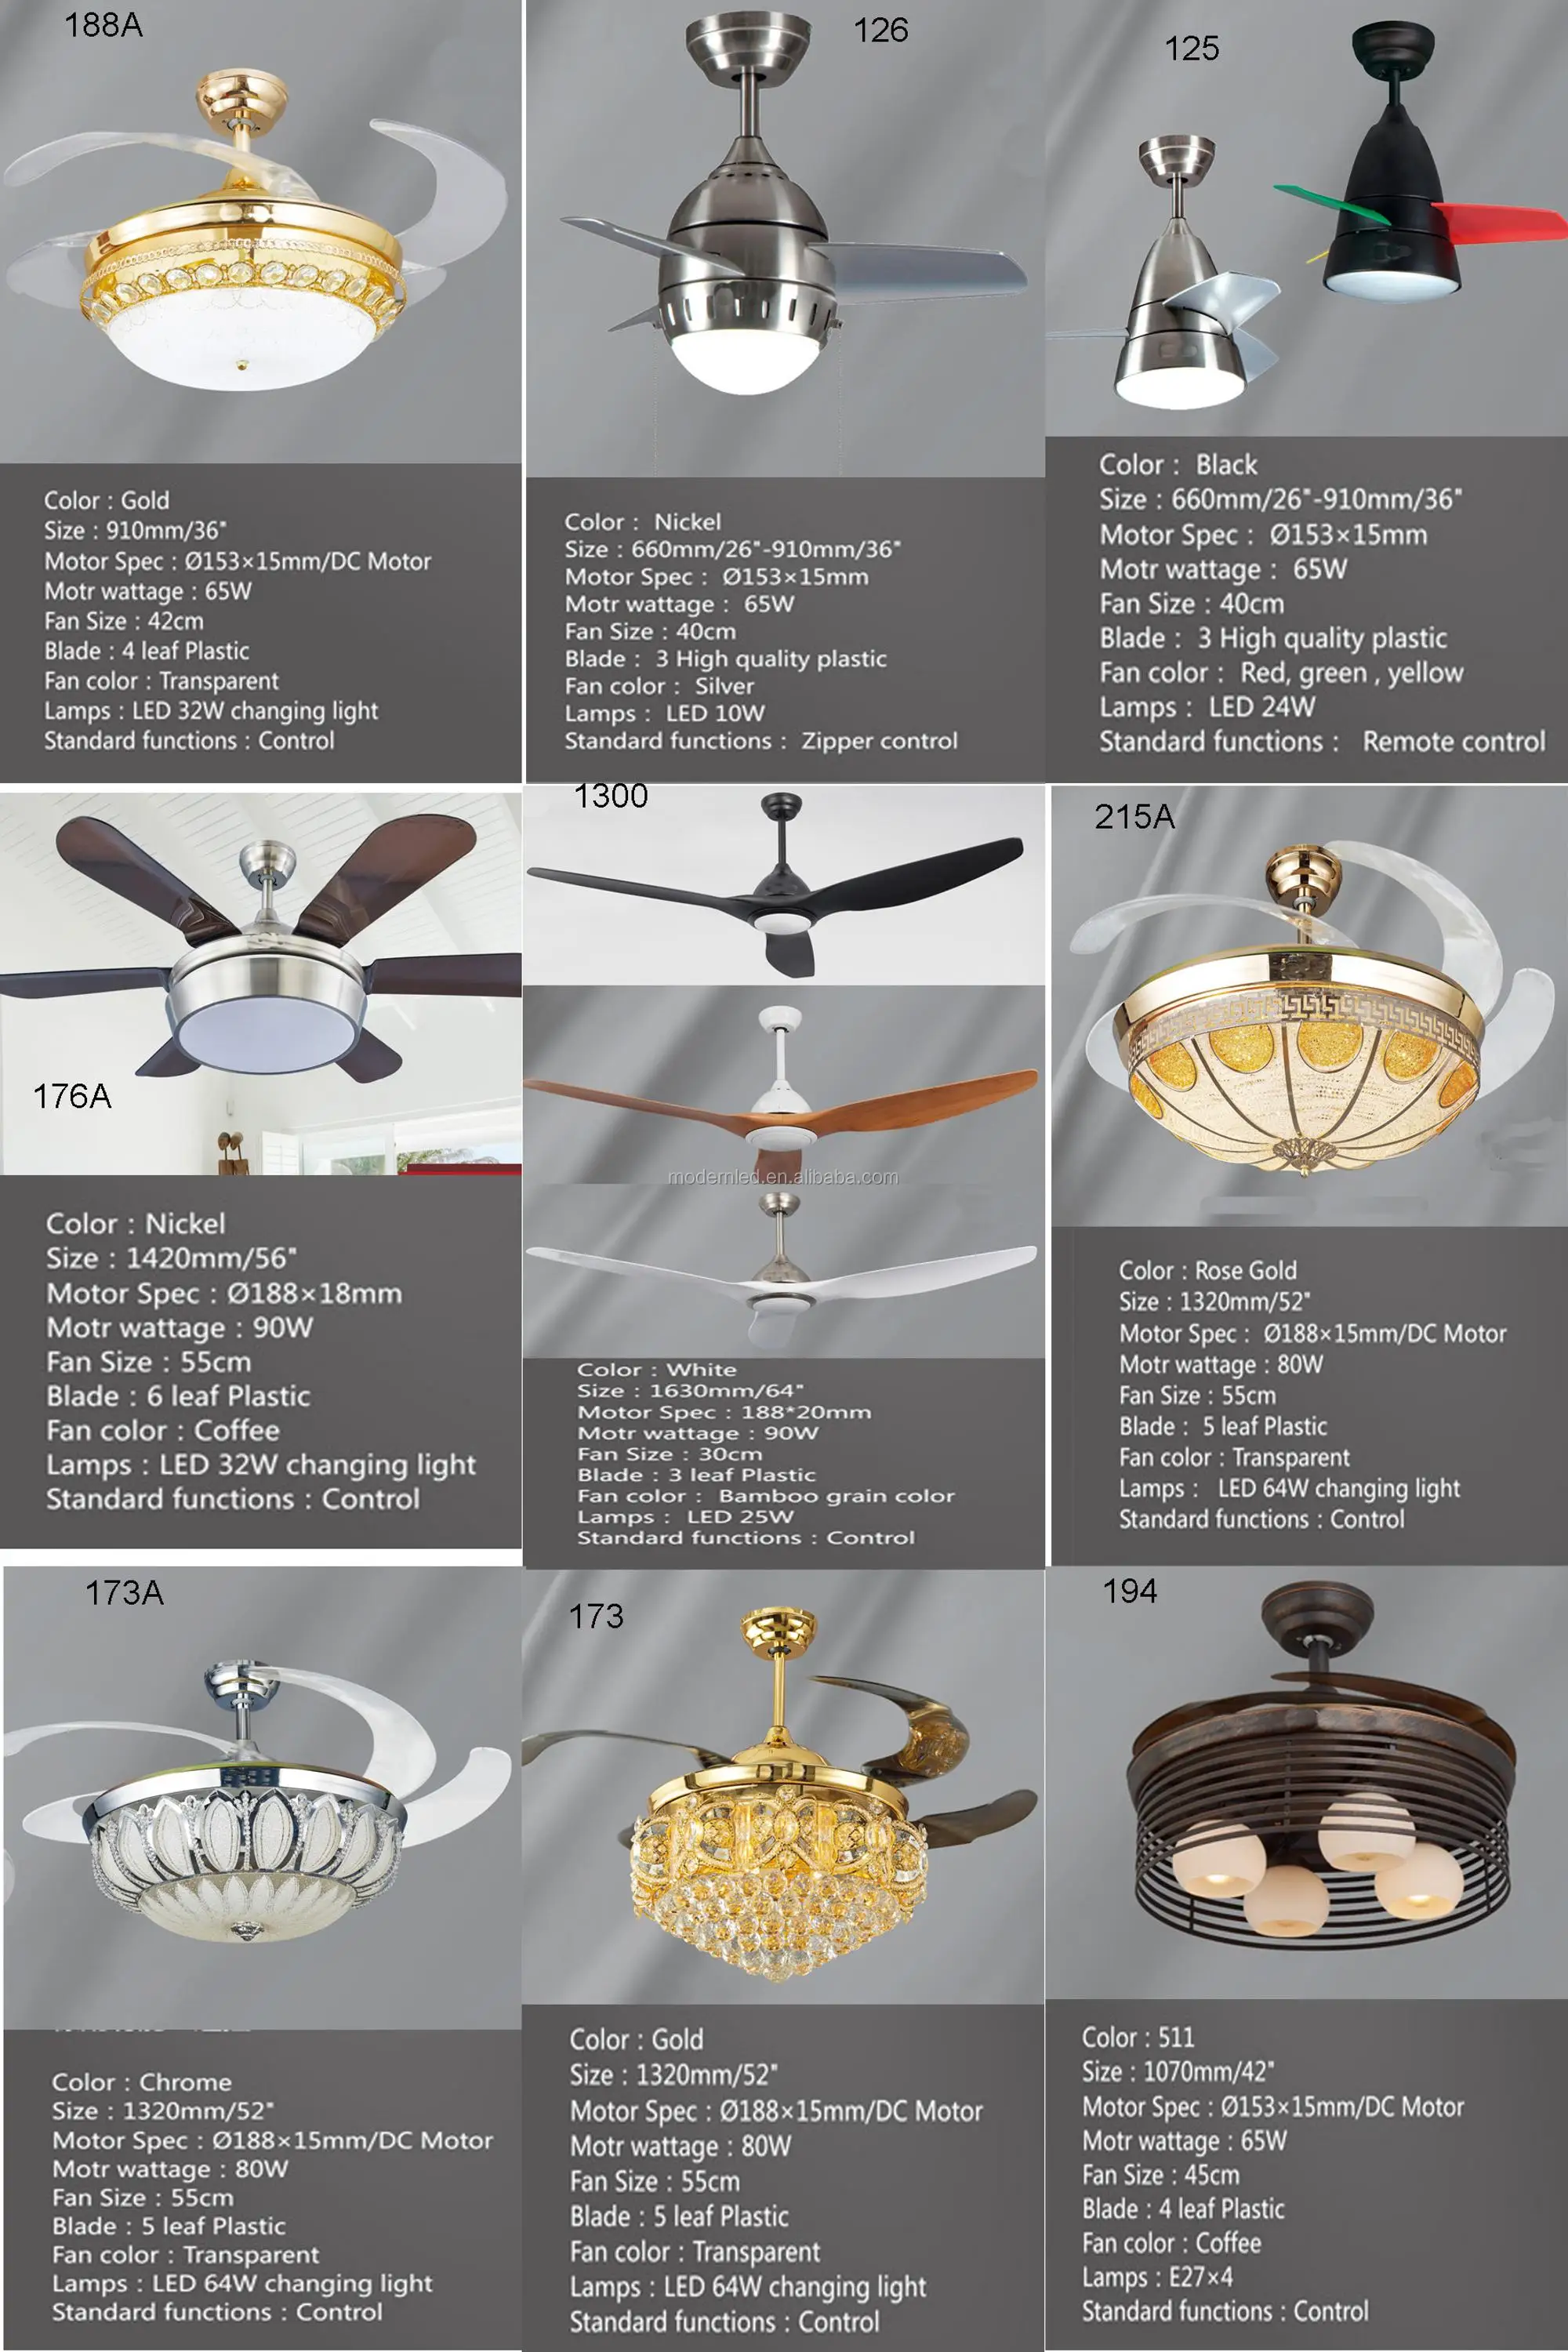 2017 modern lighting 52 inch high quality ceiling fan hidden blades with remote